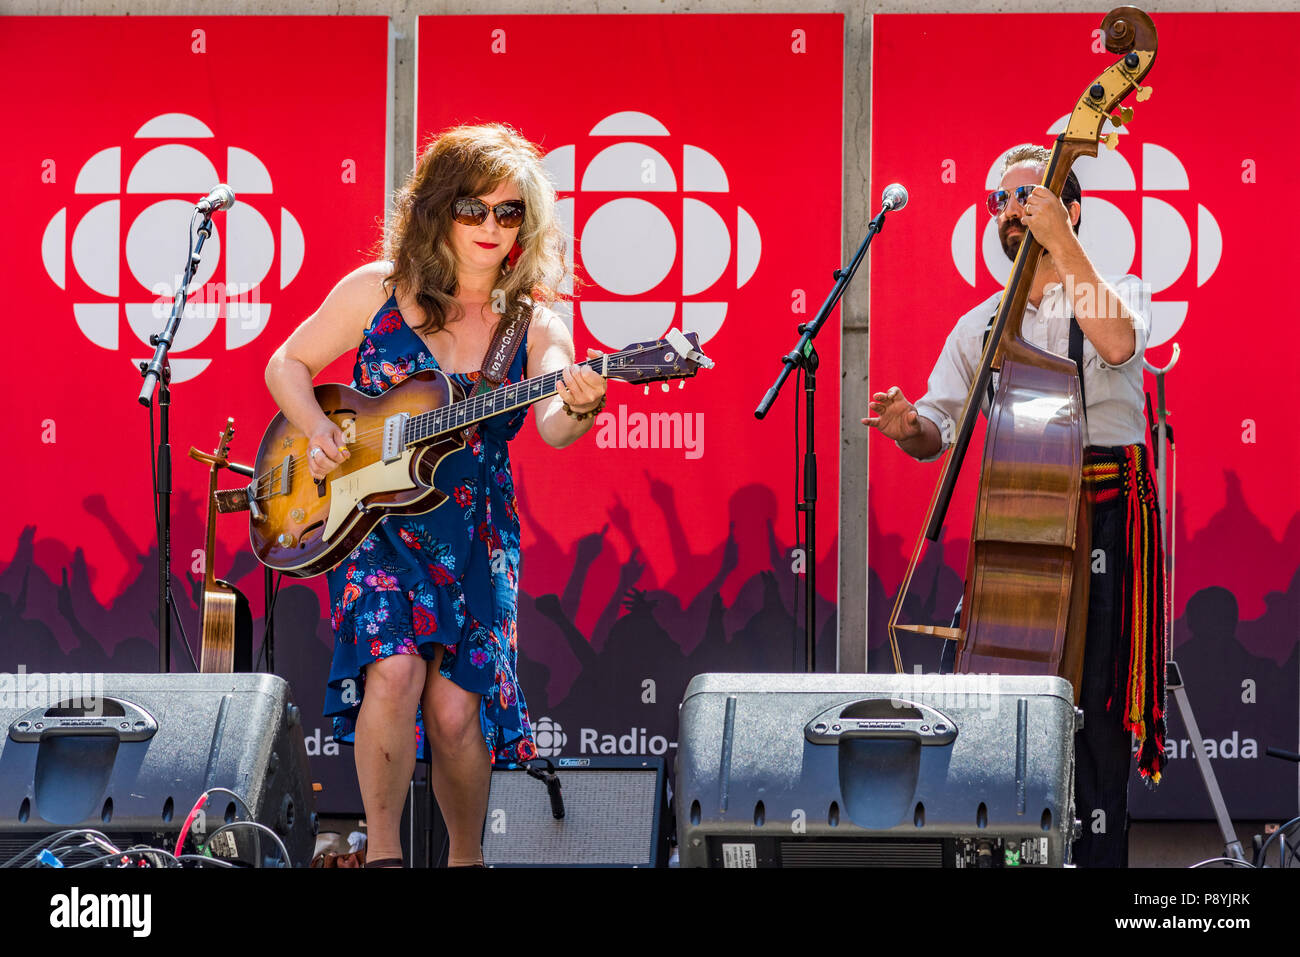 Little Miss Higgins in concert at CBC Musical Nooners, Vancouver, British Columbia, Canada. Stock Photo